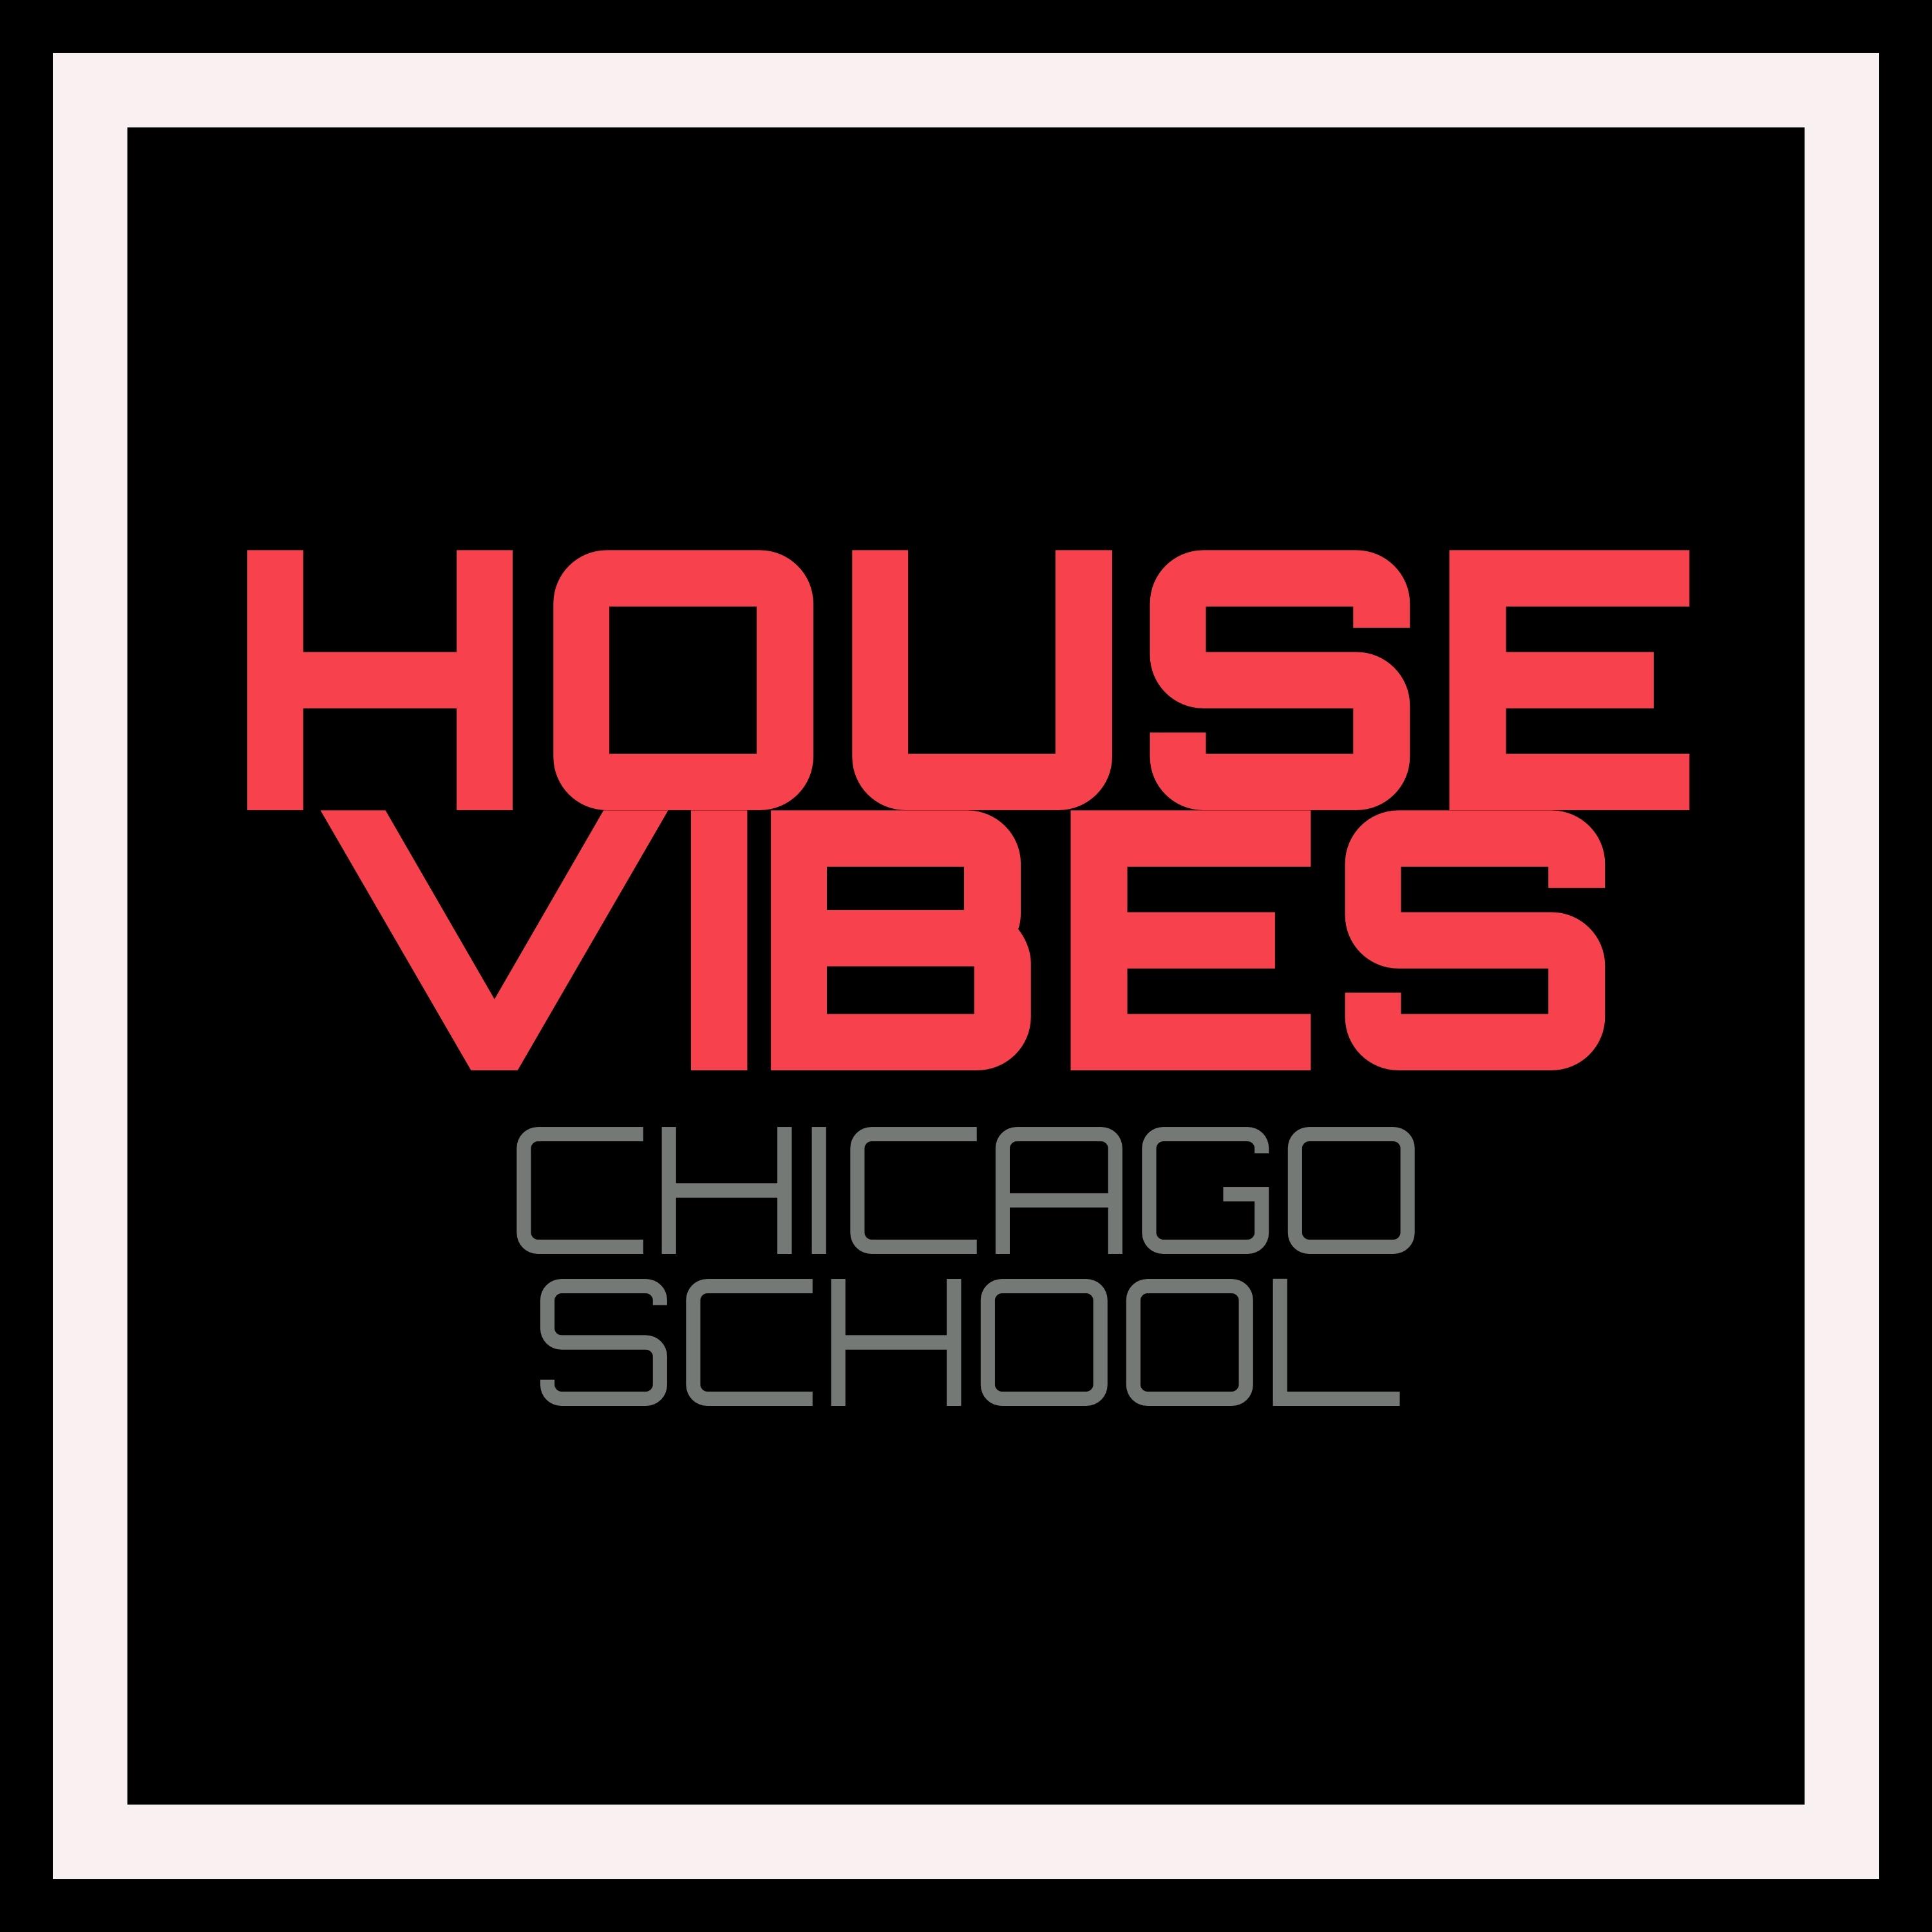 House Vibes - Chicago School